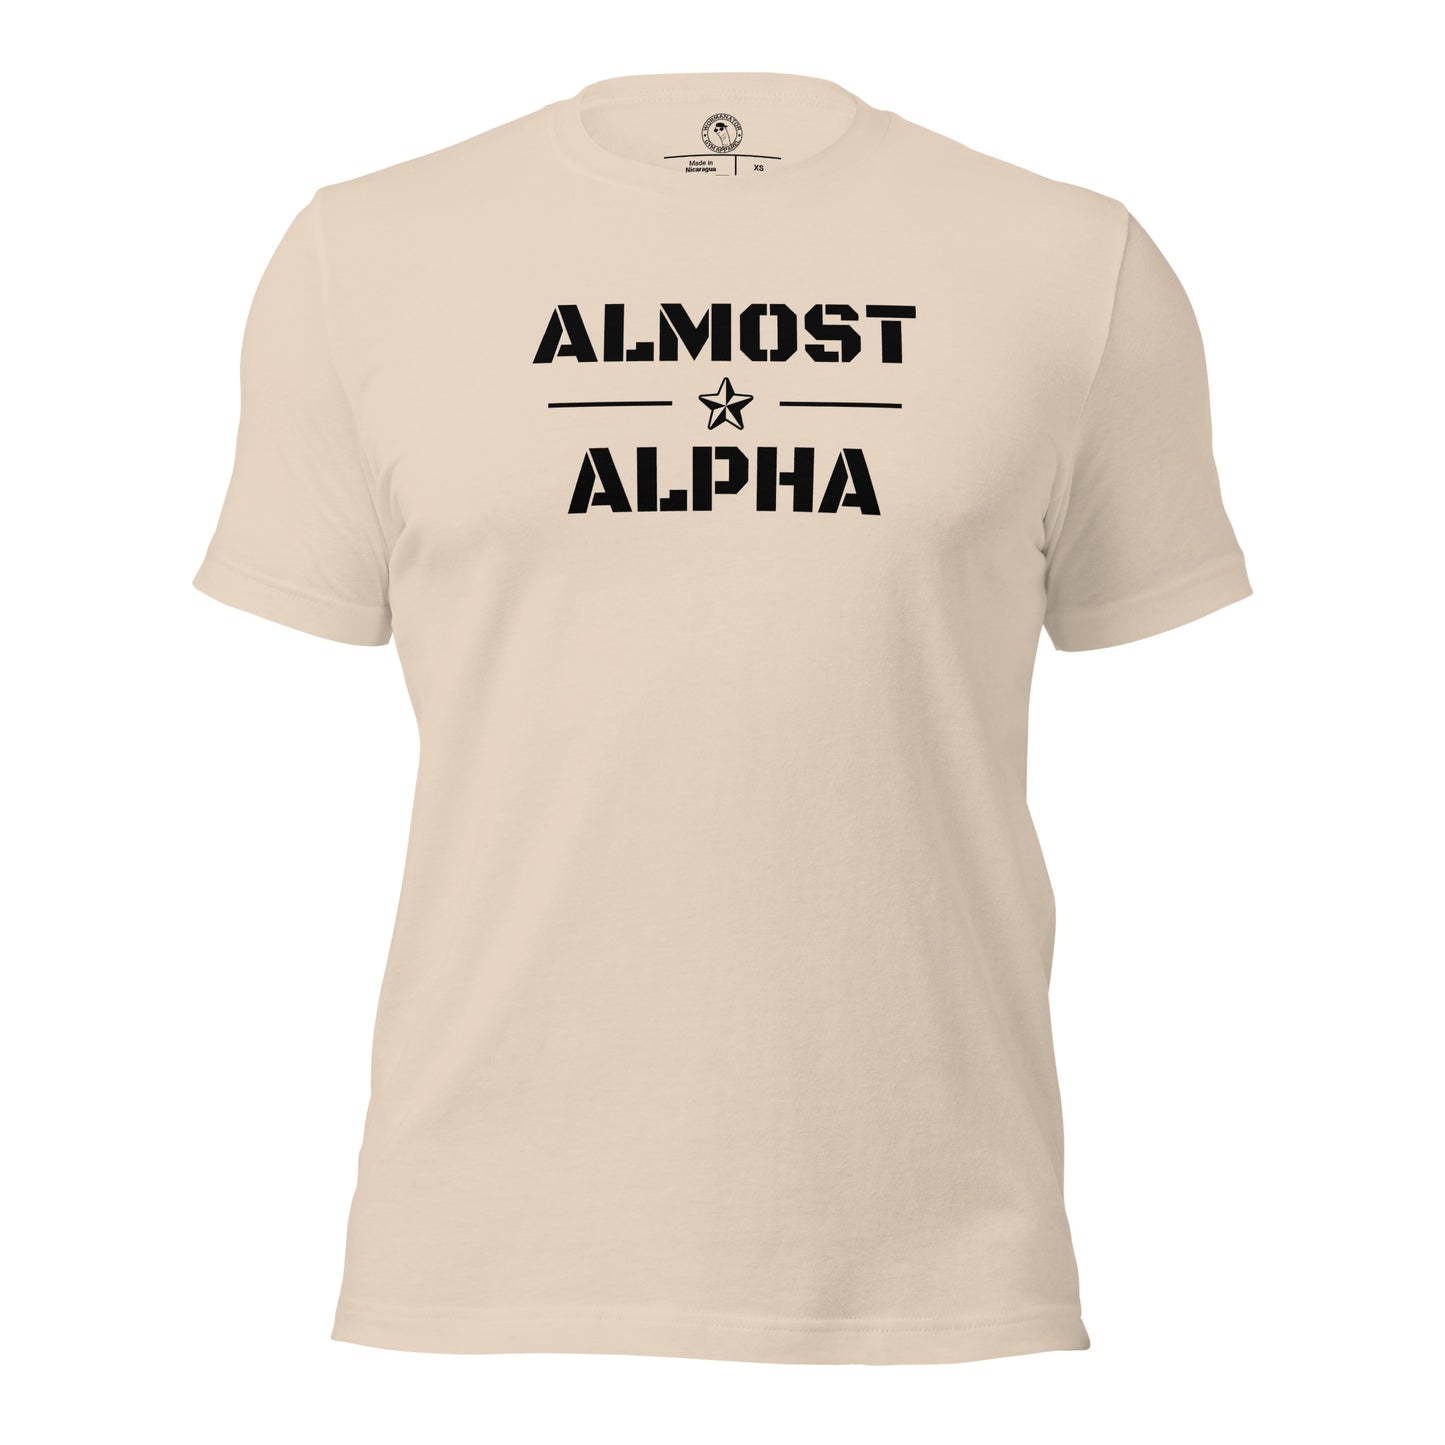 Almost Alpha Shirt in Soft Cream